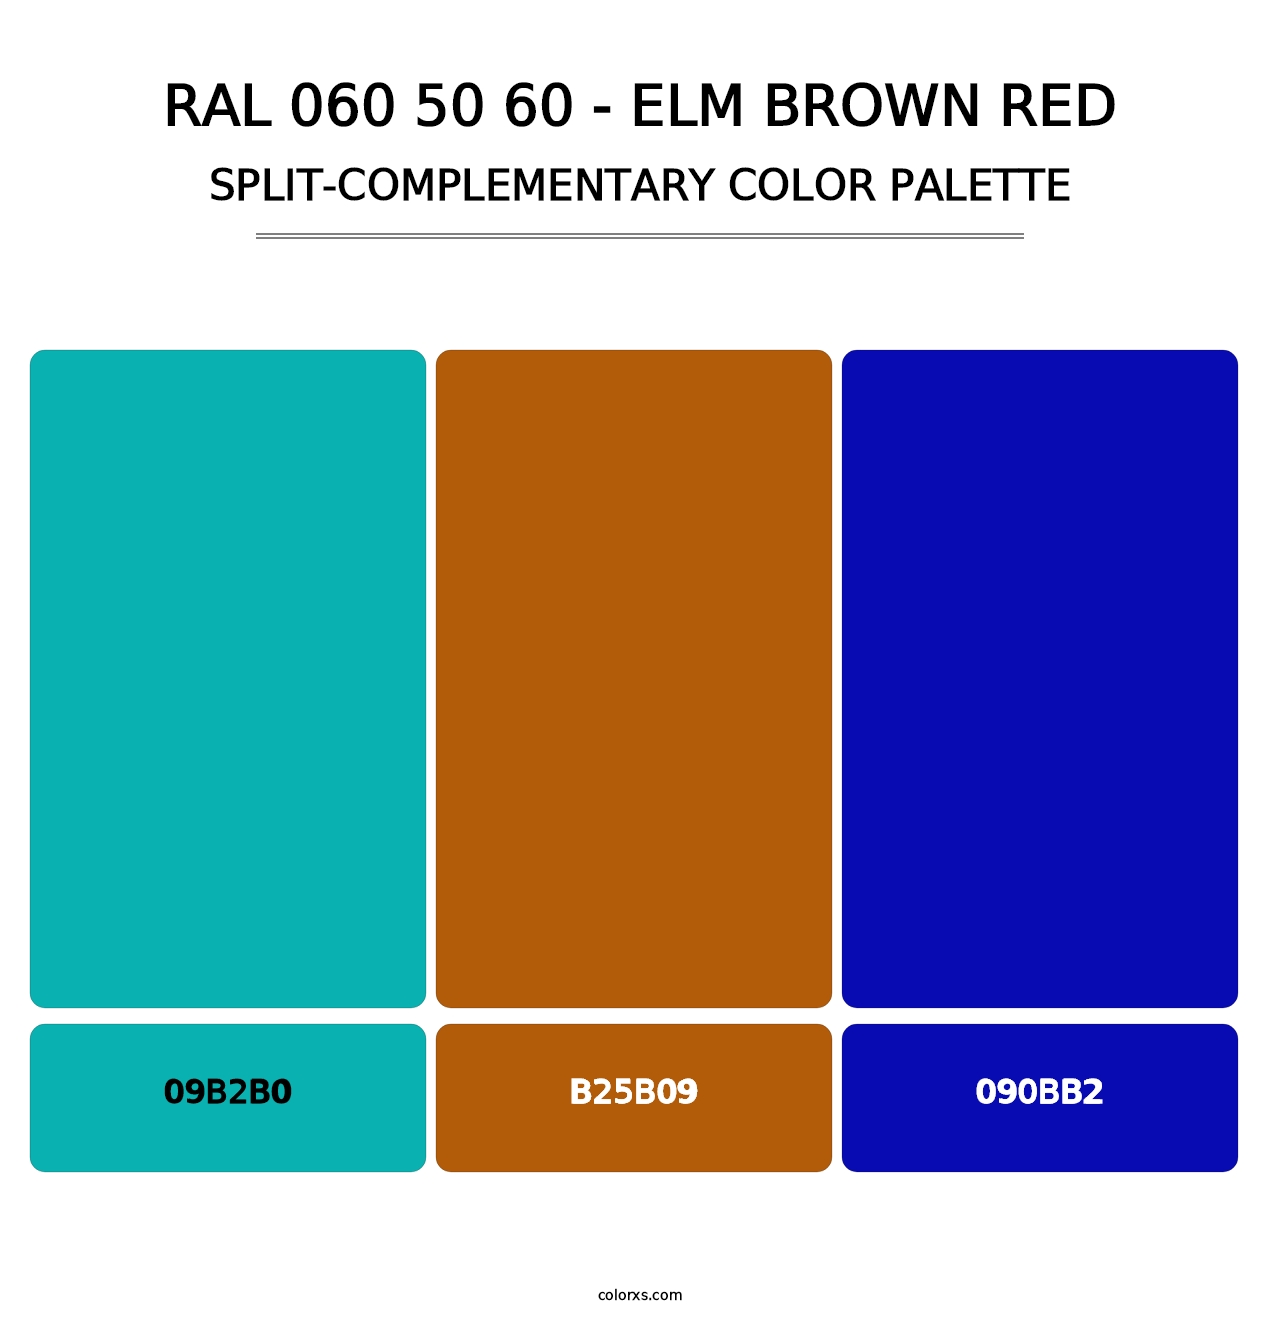 RAL 060 50 60 - Elm Brown Red - Split-Complementary Color Palette